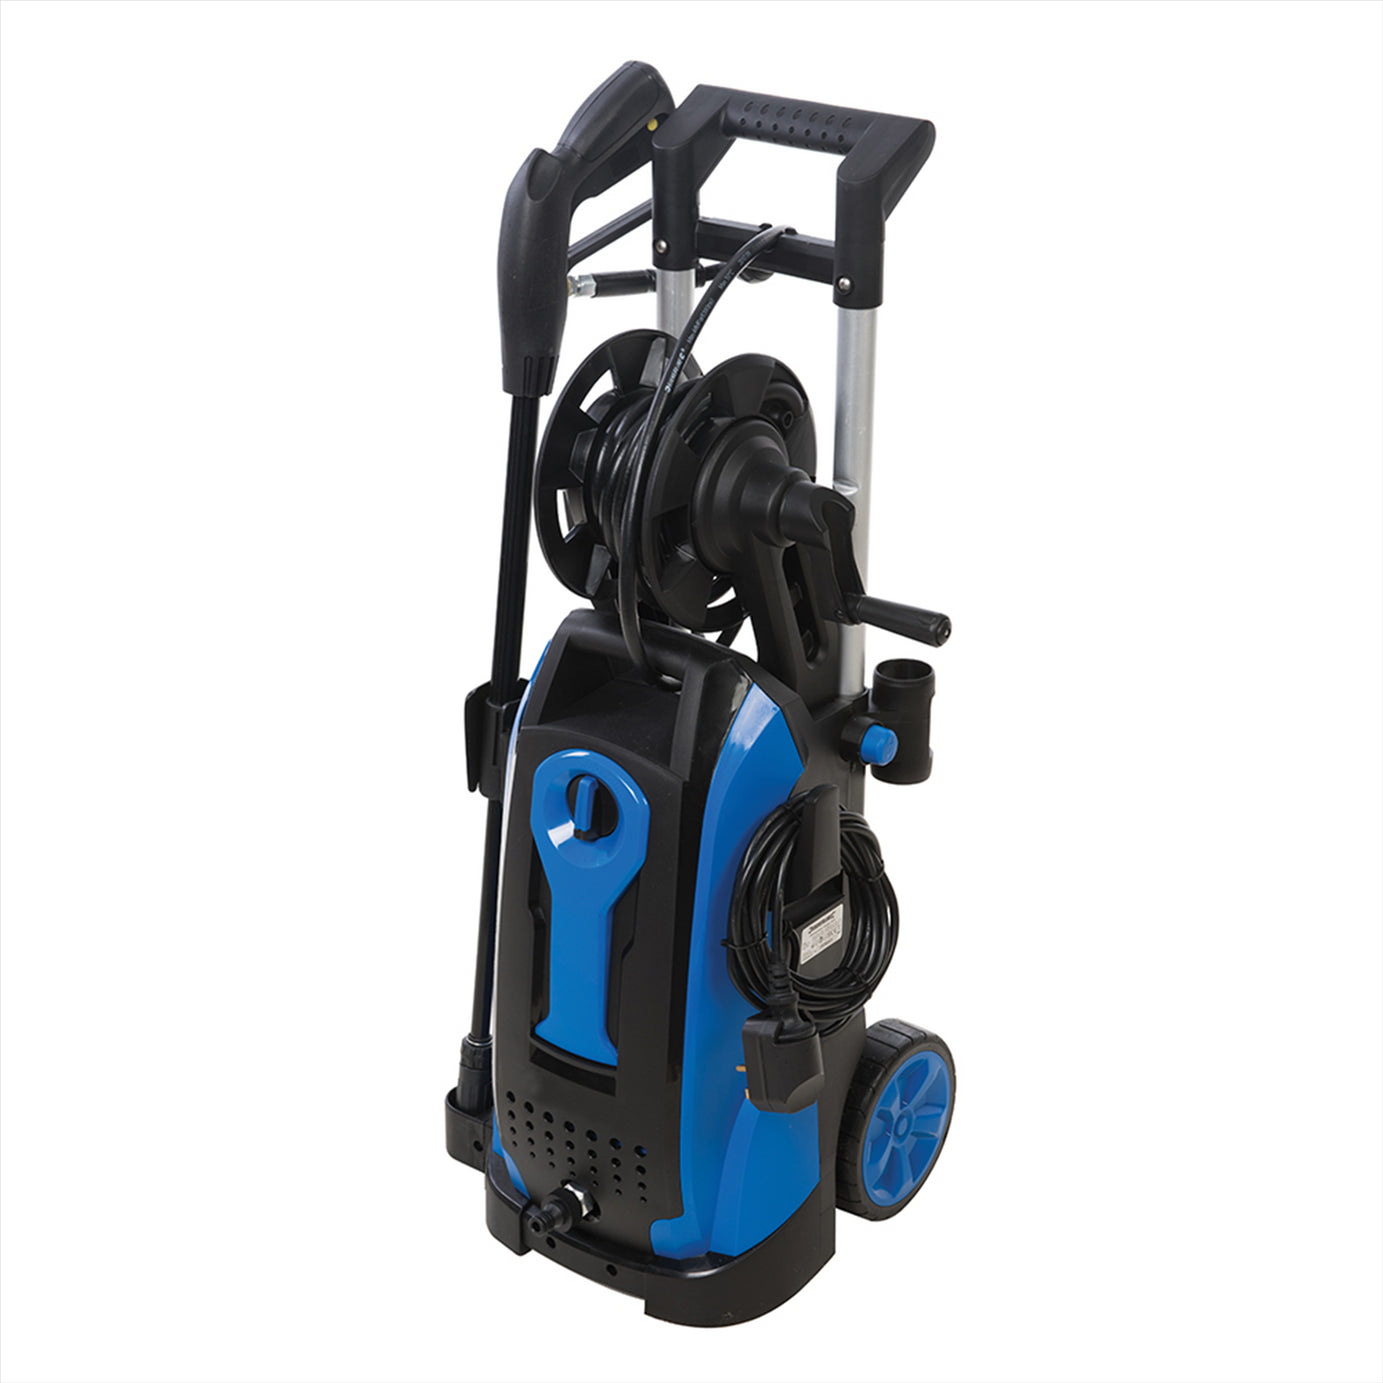 2100W Pressure Washer With Air-Cooled Induction Motor 165Bar Max